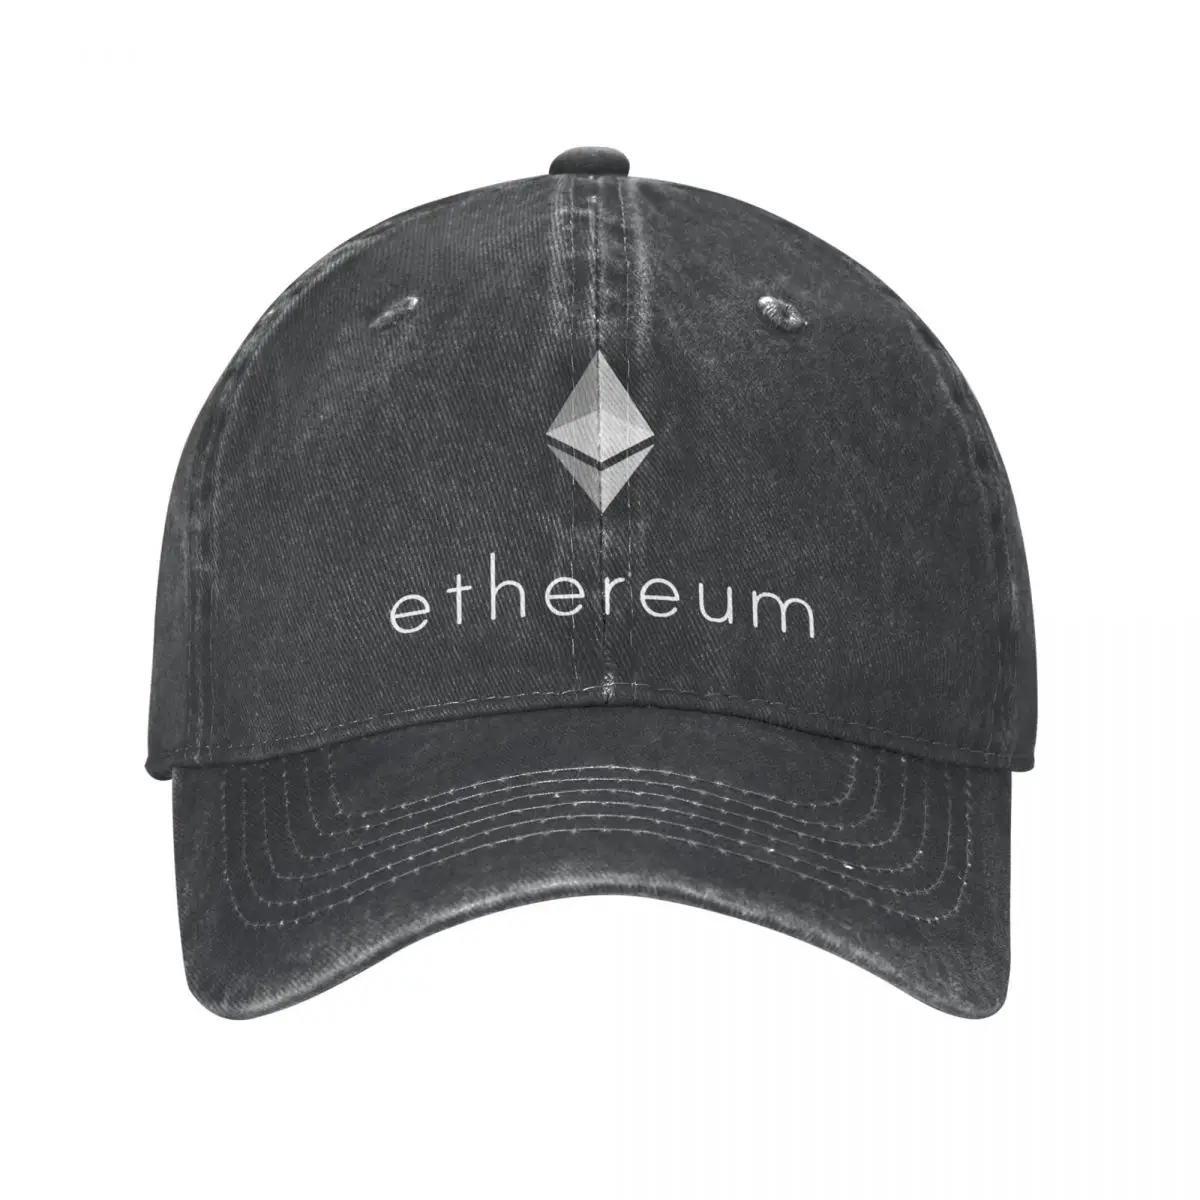 Ethereum Logo Cryptocurrency Baseball Cap Casual Distressed Cotton Block Chain Snapback Hat for Men Women Gift Hats Cap